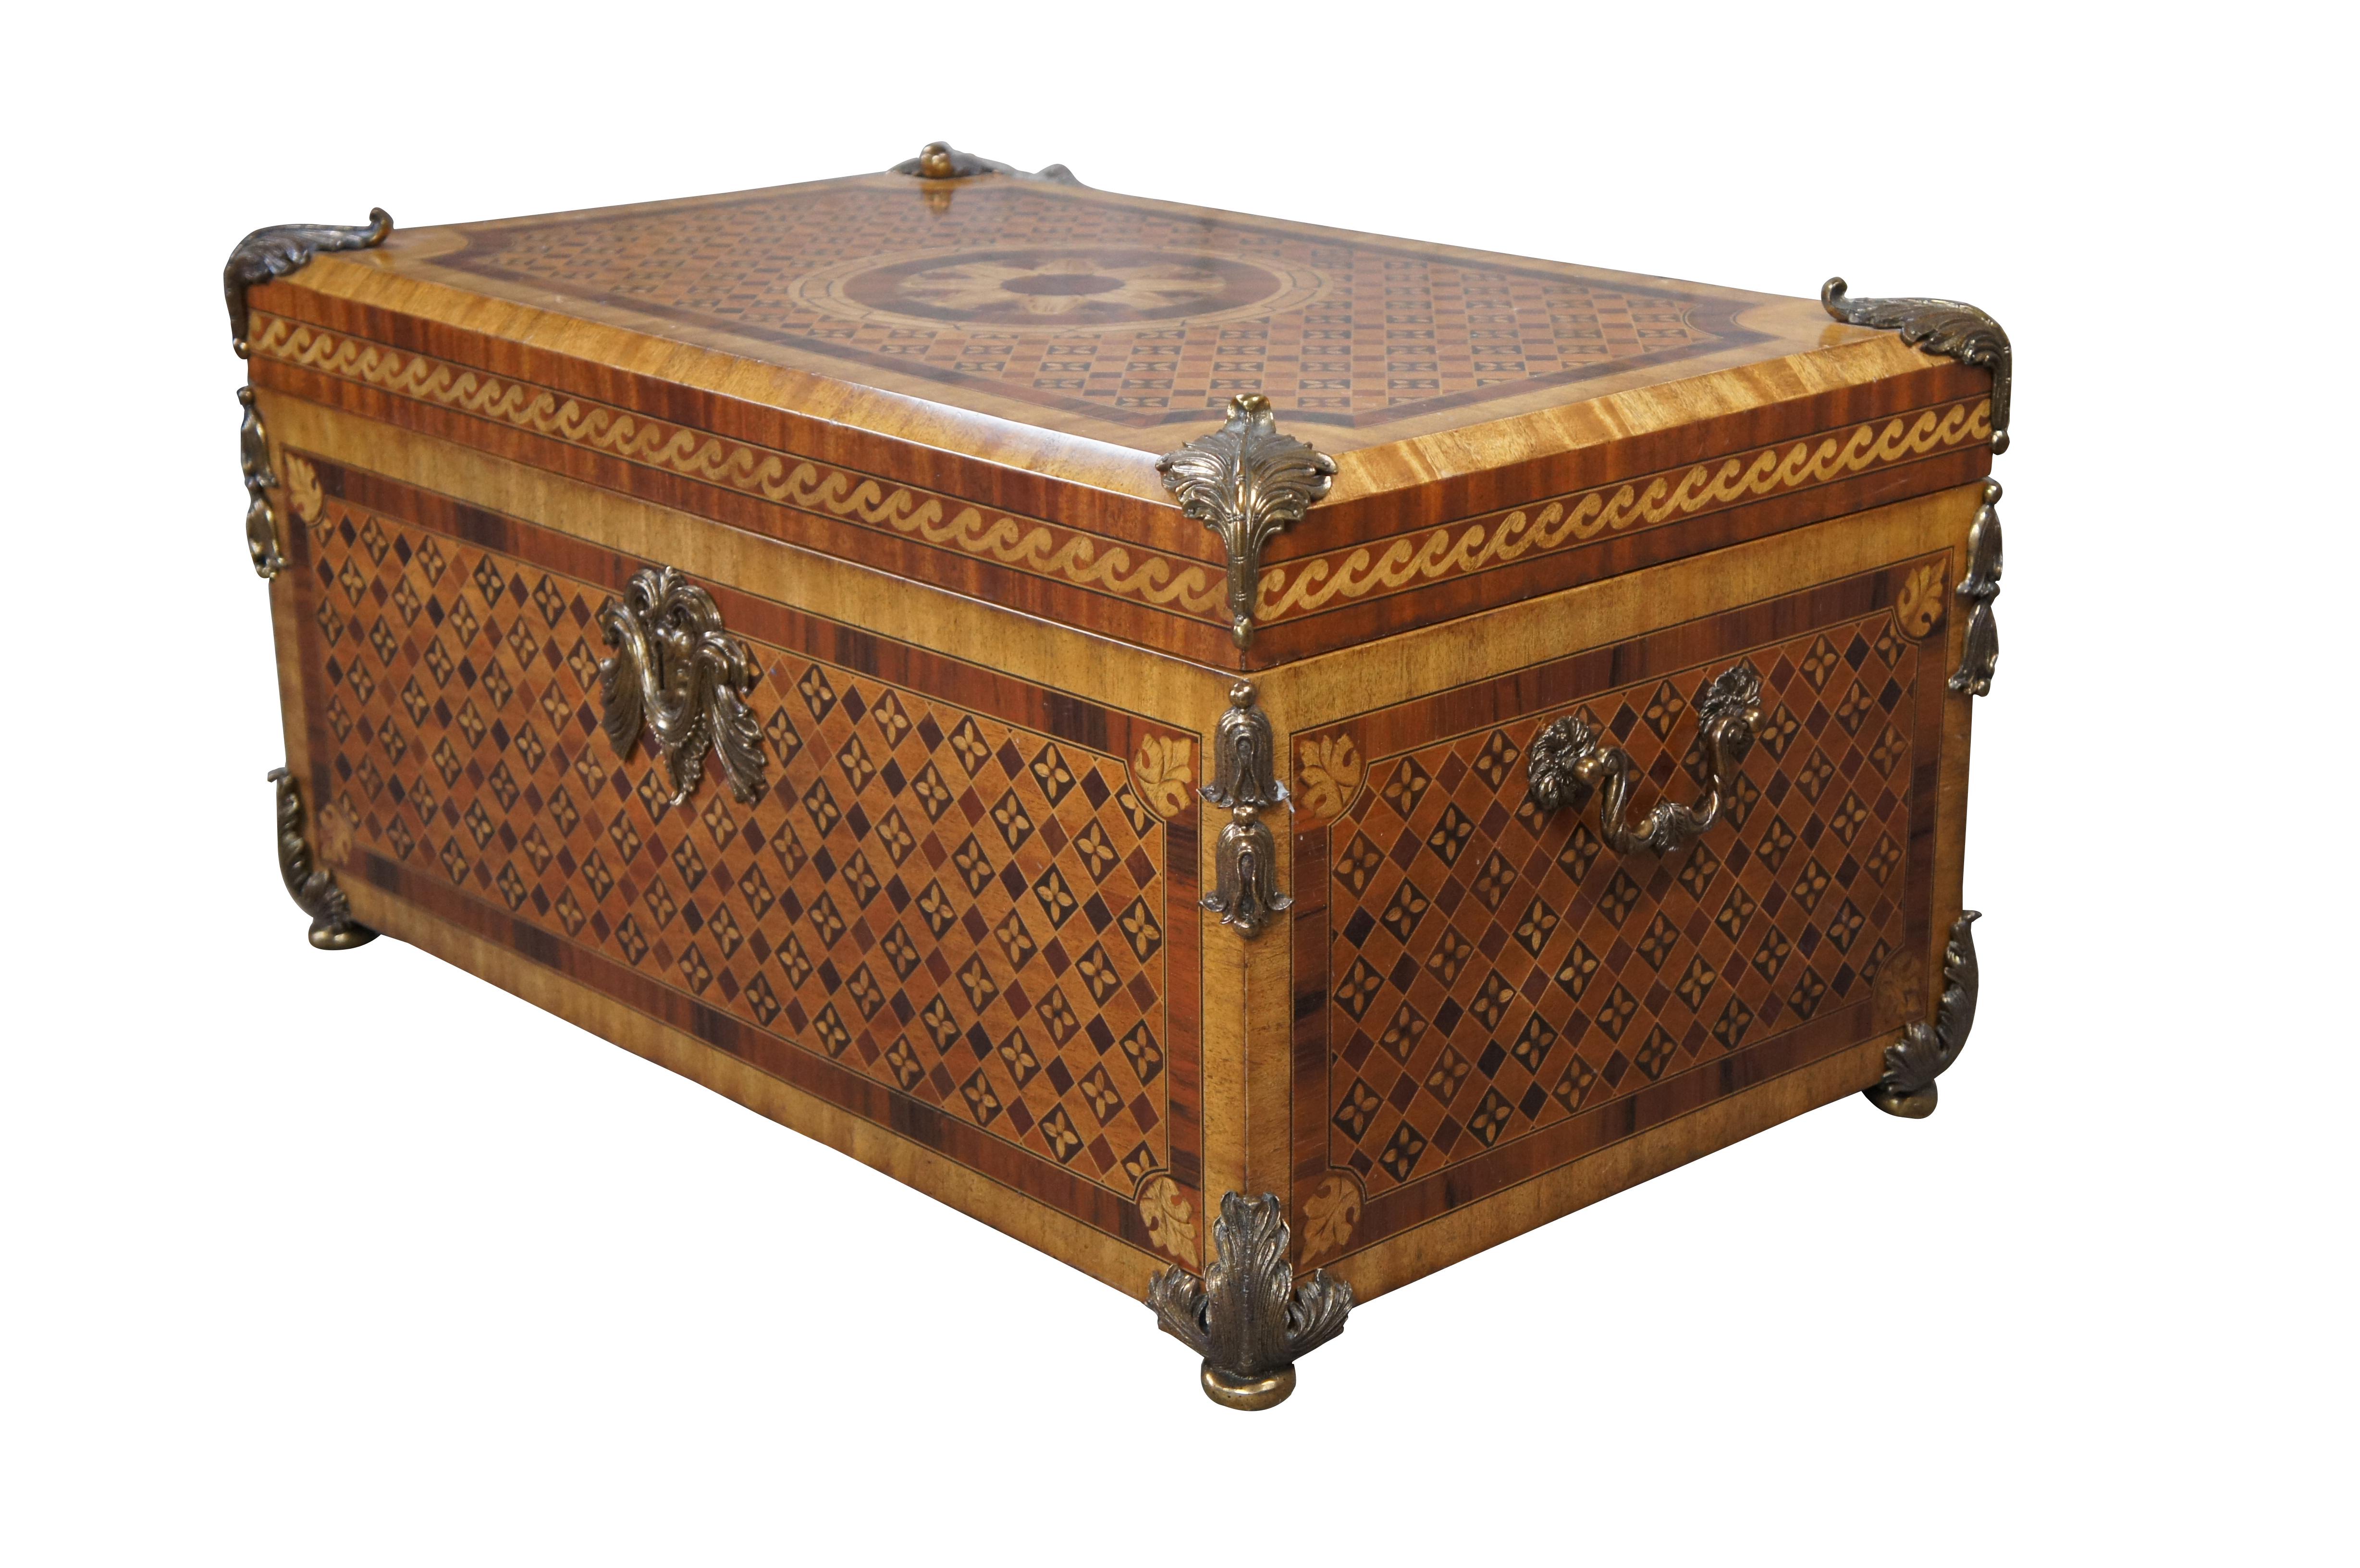 Exquisite marquetry chest by Maitland Smith, Circa 2000s. Made from mahogany with geometric diamond patterned marquetry, crotch burled panels, inlay and brass ormolu mounts. Opens via brass hinges for storage. A stately design that will draw